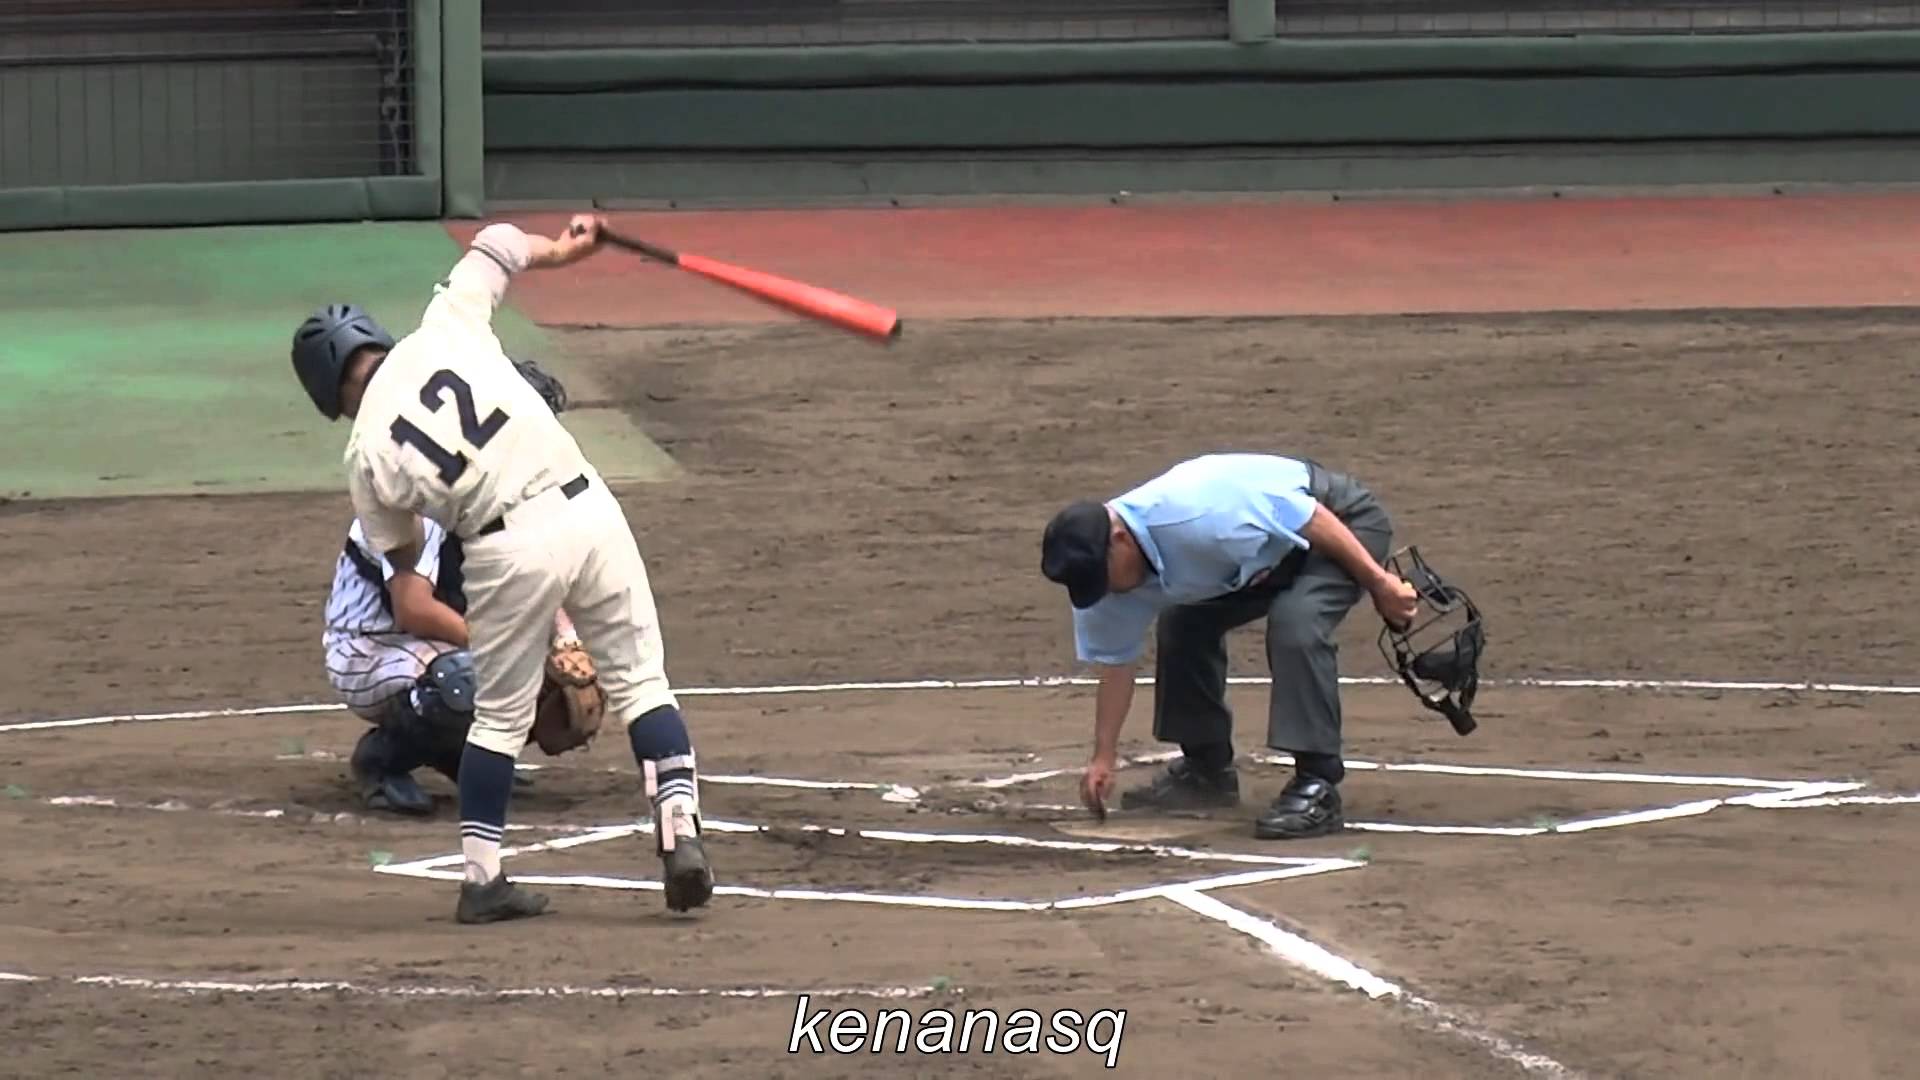 Must See: Japanese high school baseball player does dance movements while batting